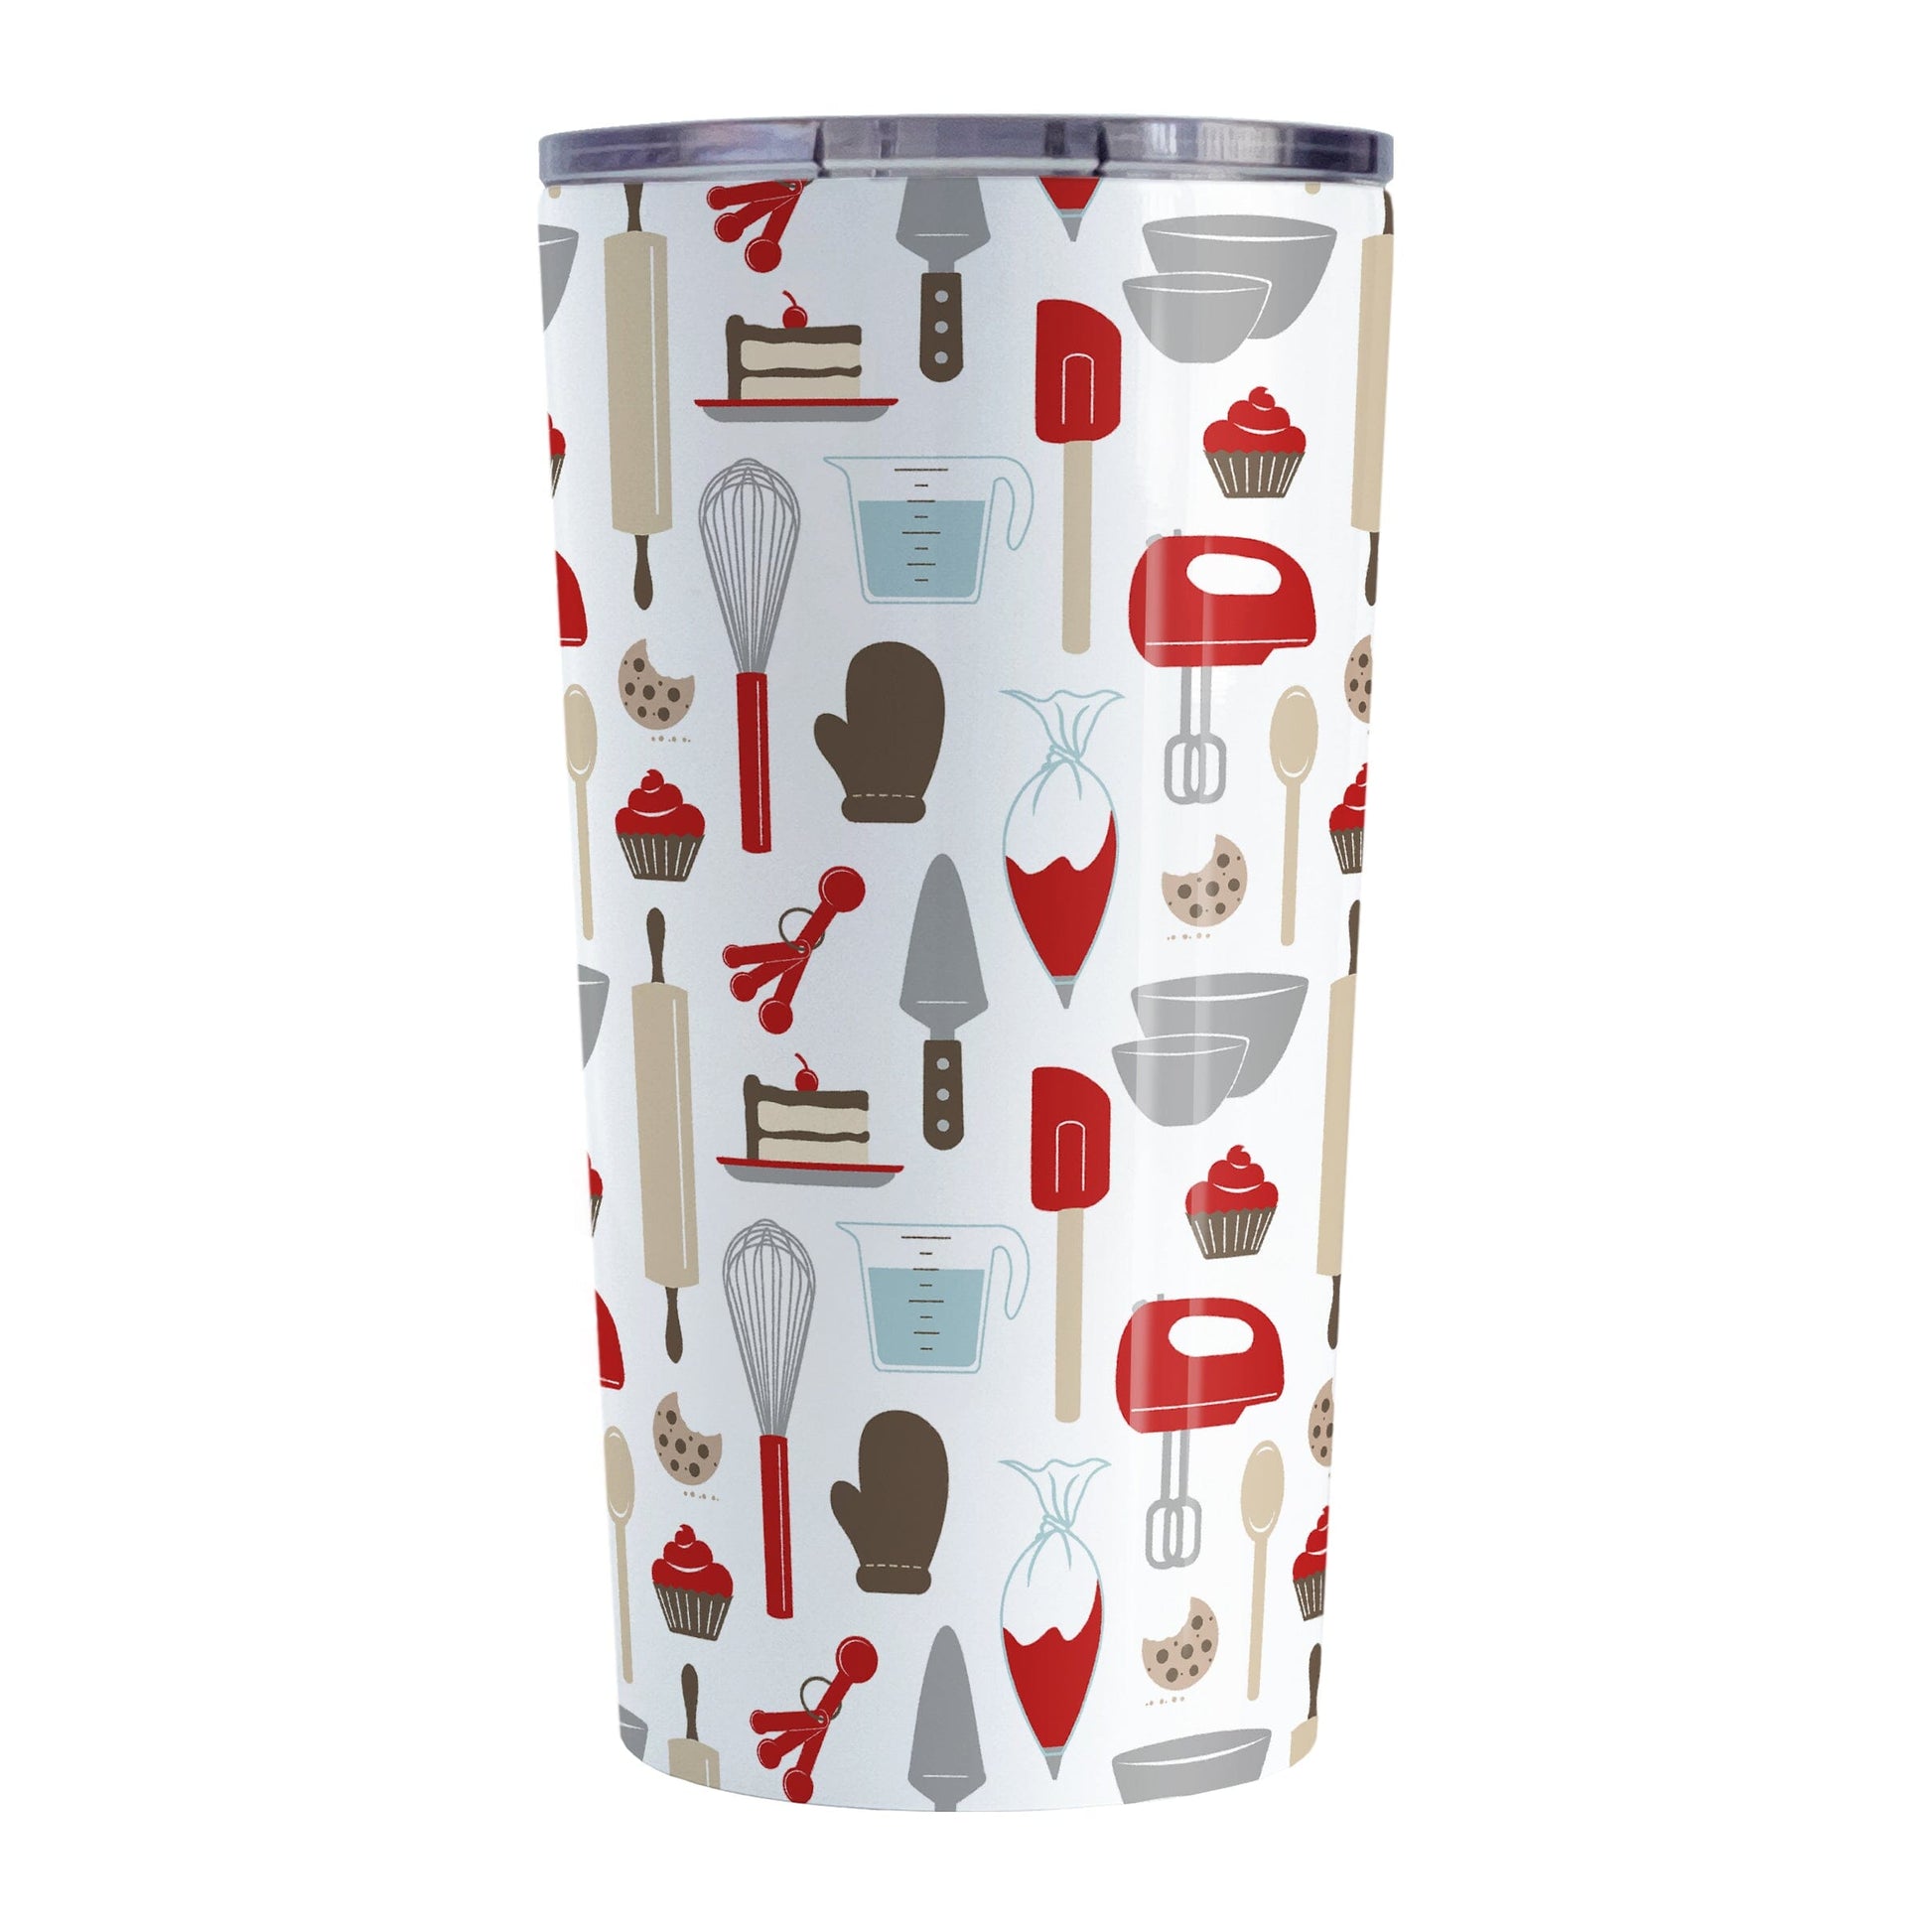 Red Baking Pattern Tumbler Cup (20oz) at Amy's Coffee Mugs. A stainless steel tumbler cup designed with a pattern of baking tools like spatulas, whisks, mixers, bowls, and spoons, with cookies, cupcakes, and cake all in a red, gray, brown, and beige color scheme that wraps around the cup. 